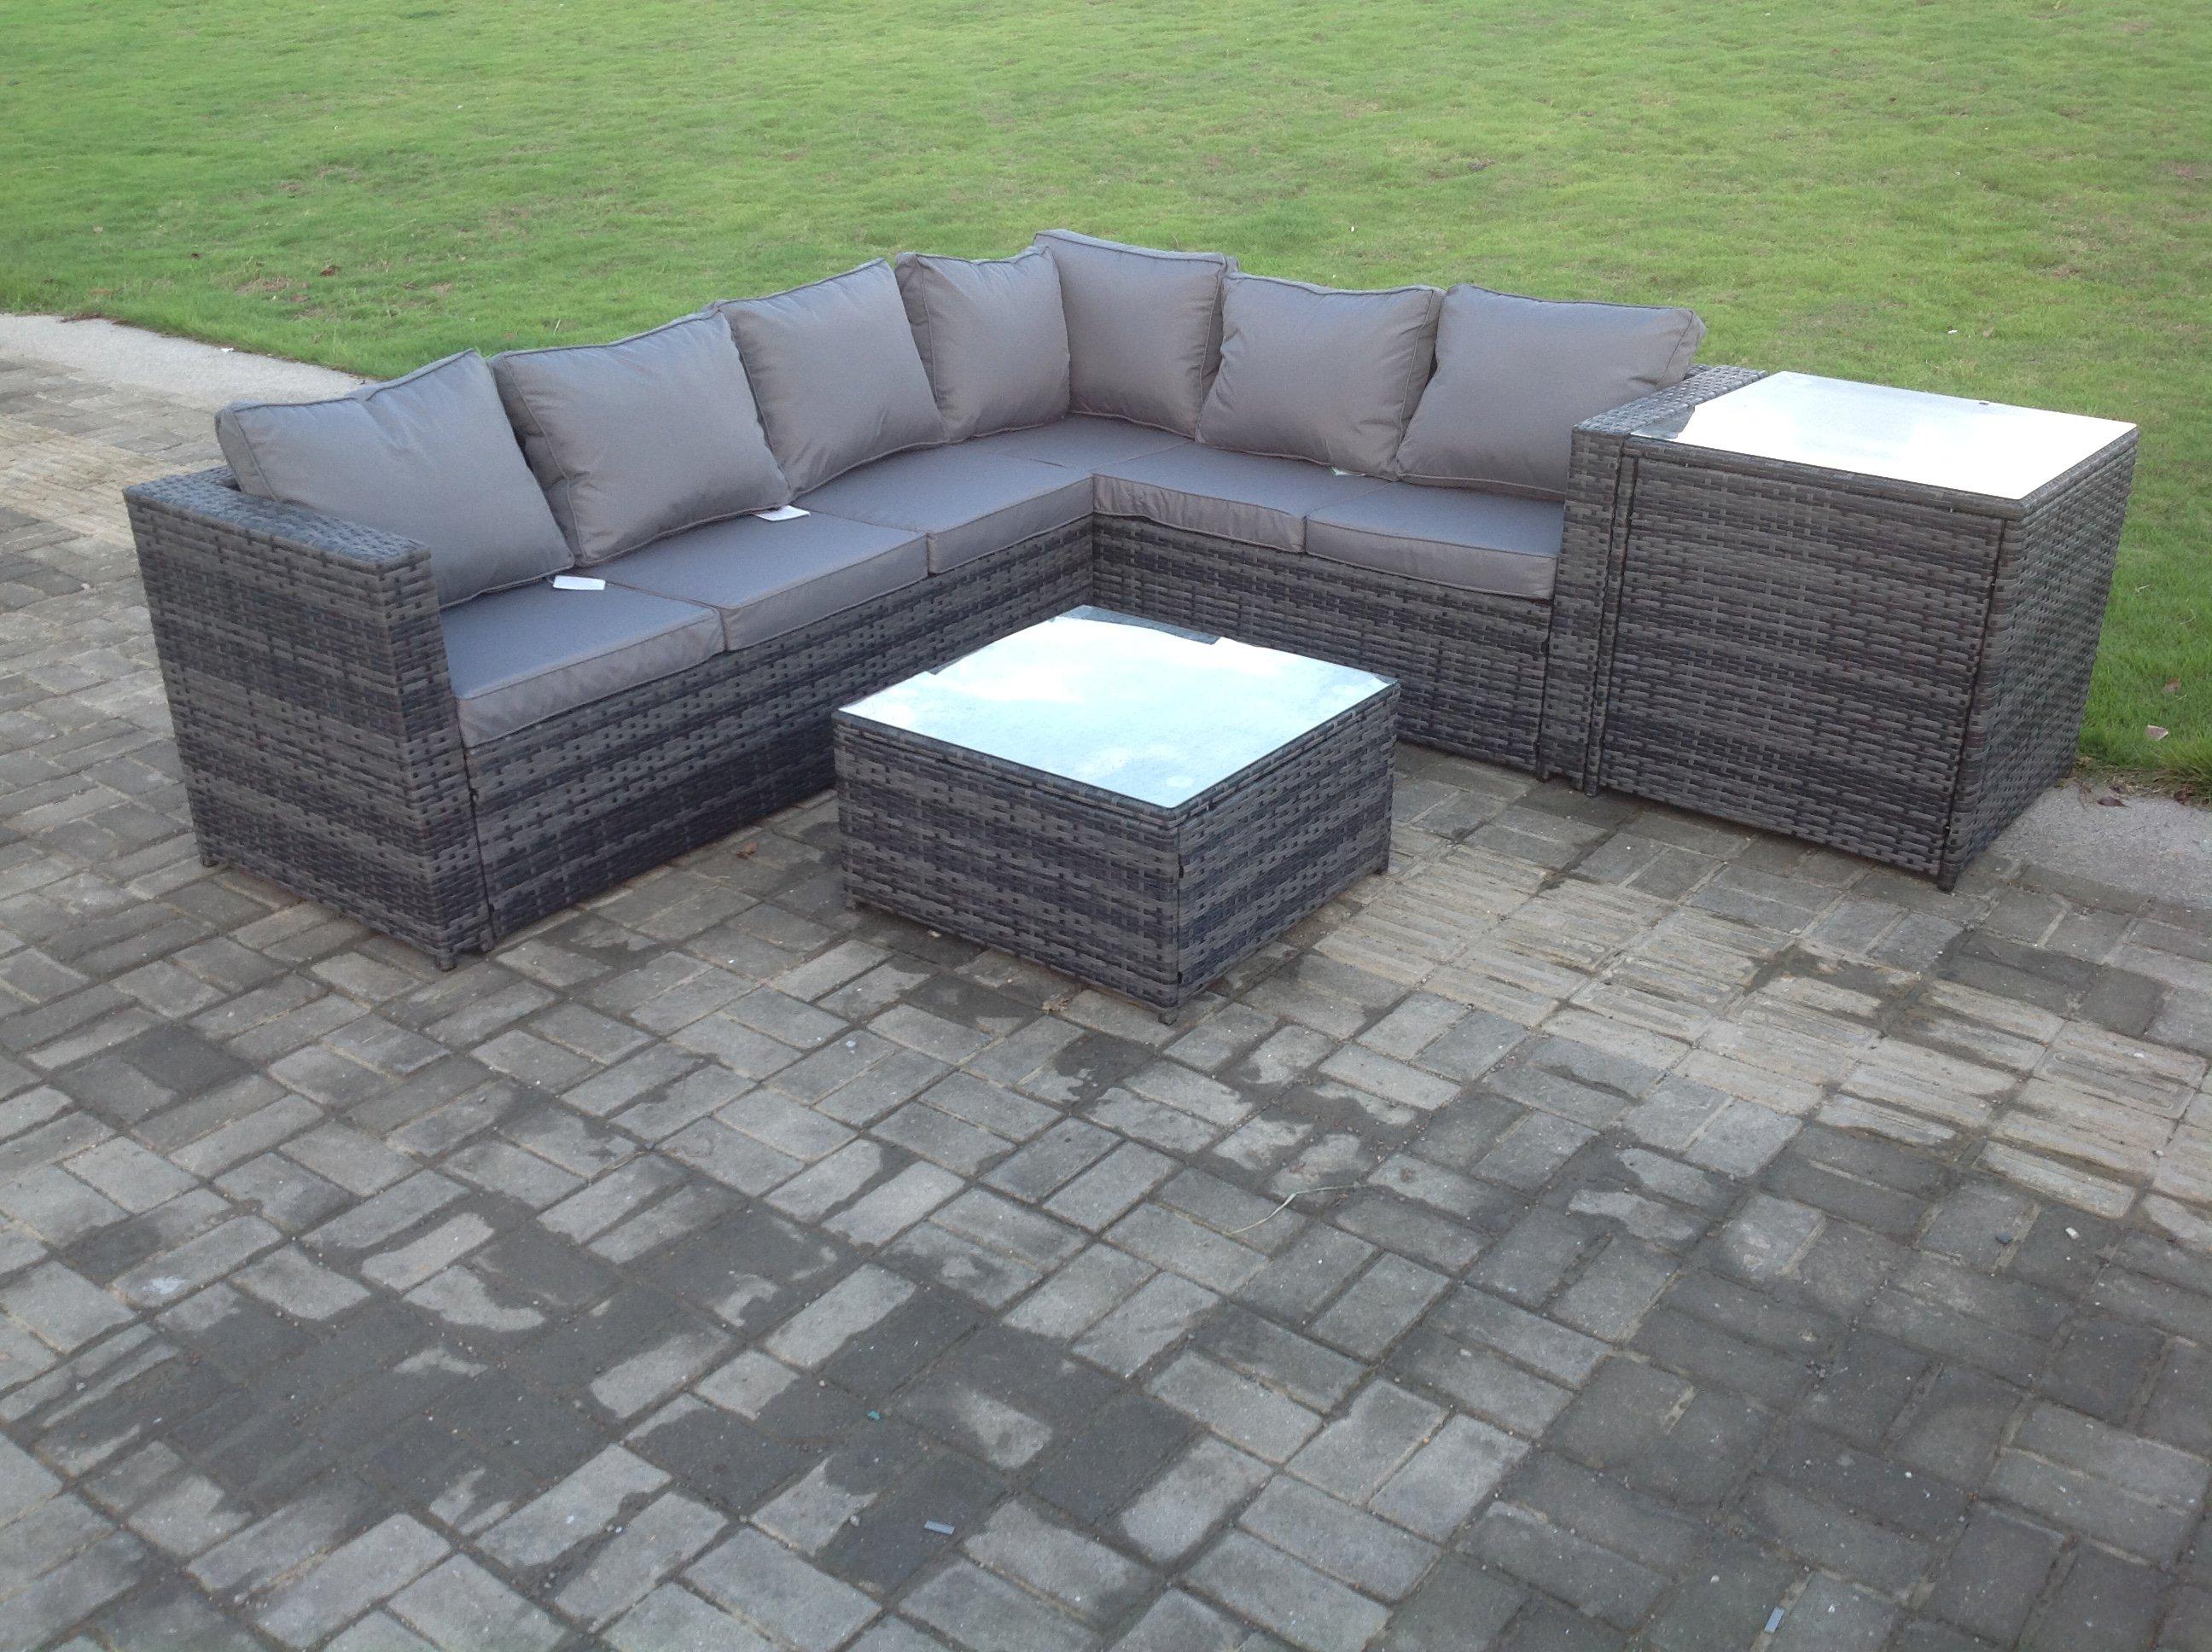 Rattan Corner Sofa Set Garden Furniture With Coffee Tall Table And Side Table